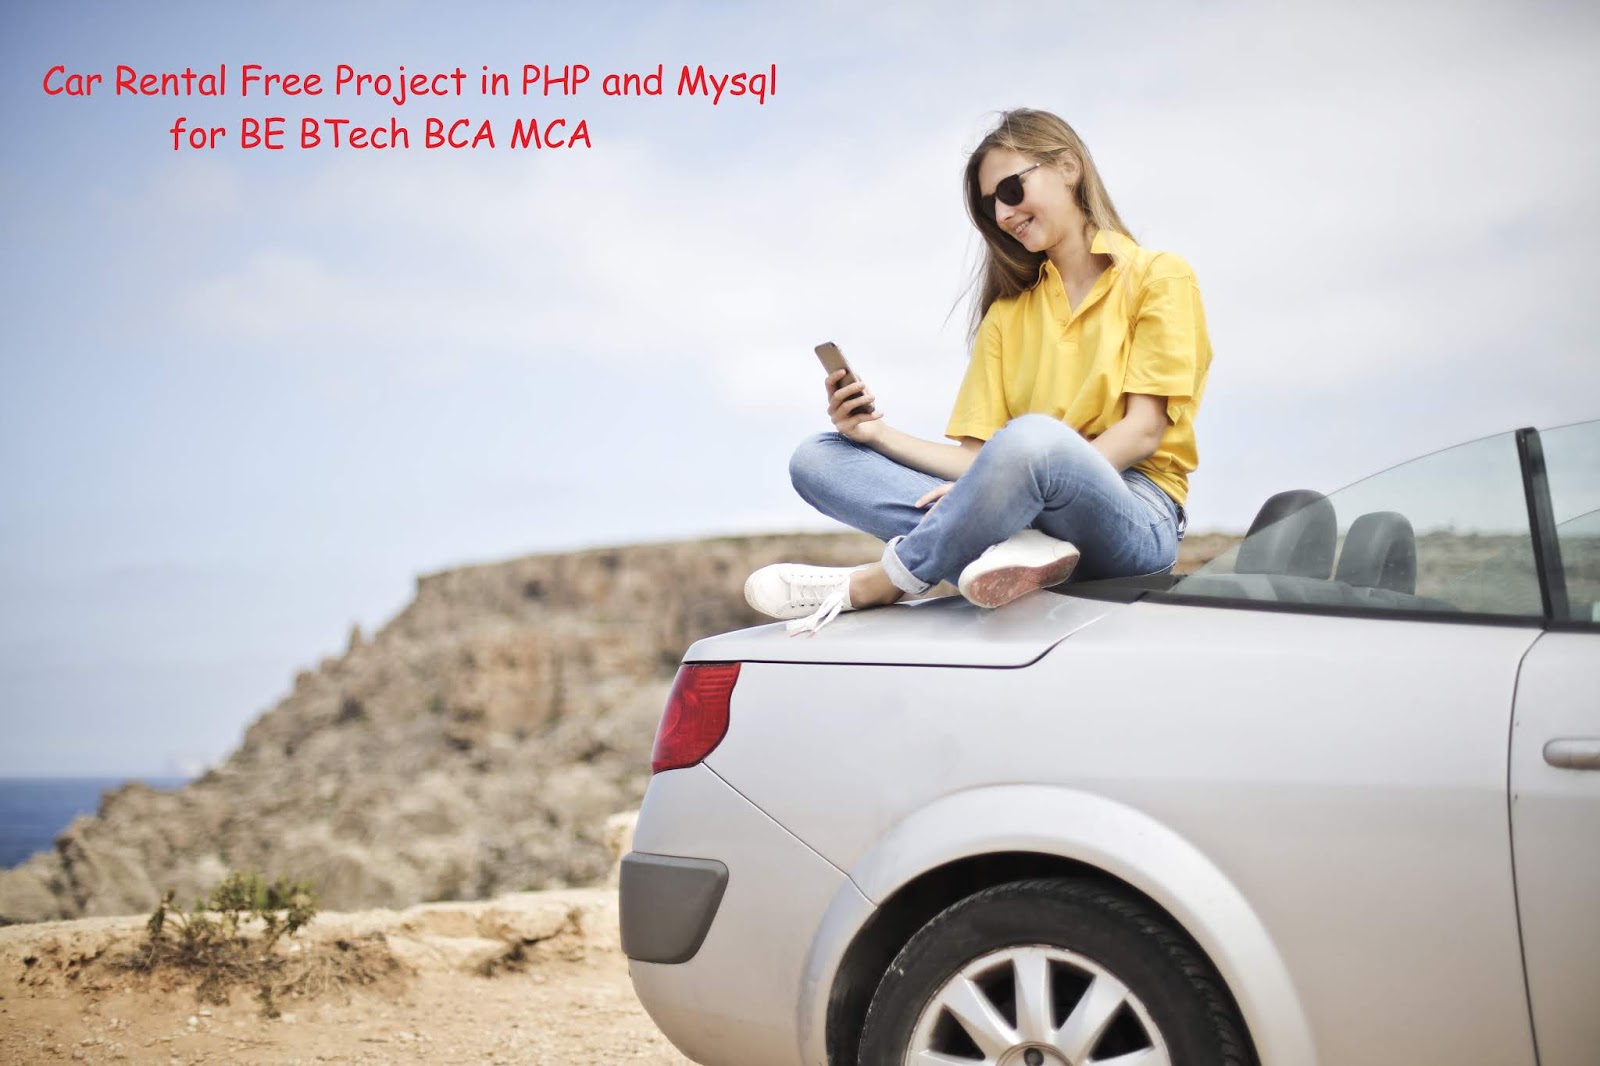 Car Rental Free Project in PHP and Mysql for BE BTech BCA MCA